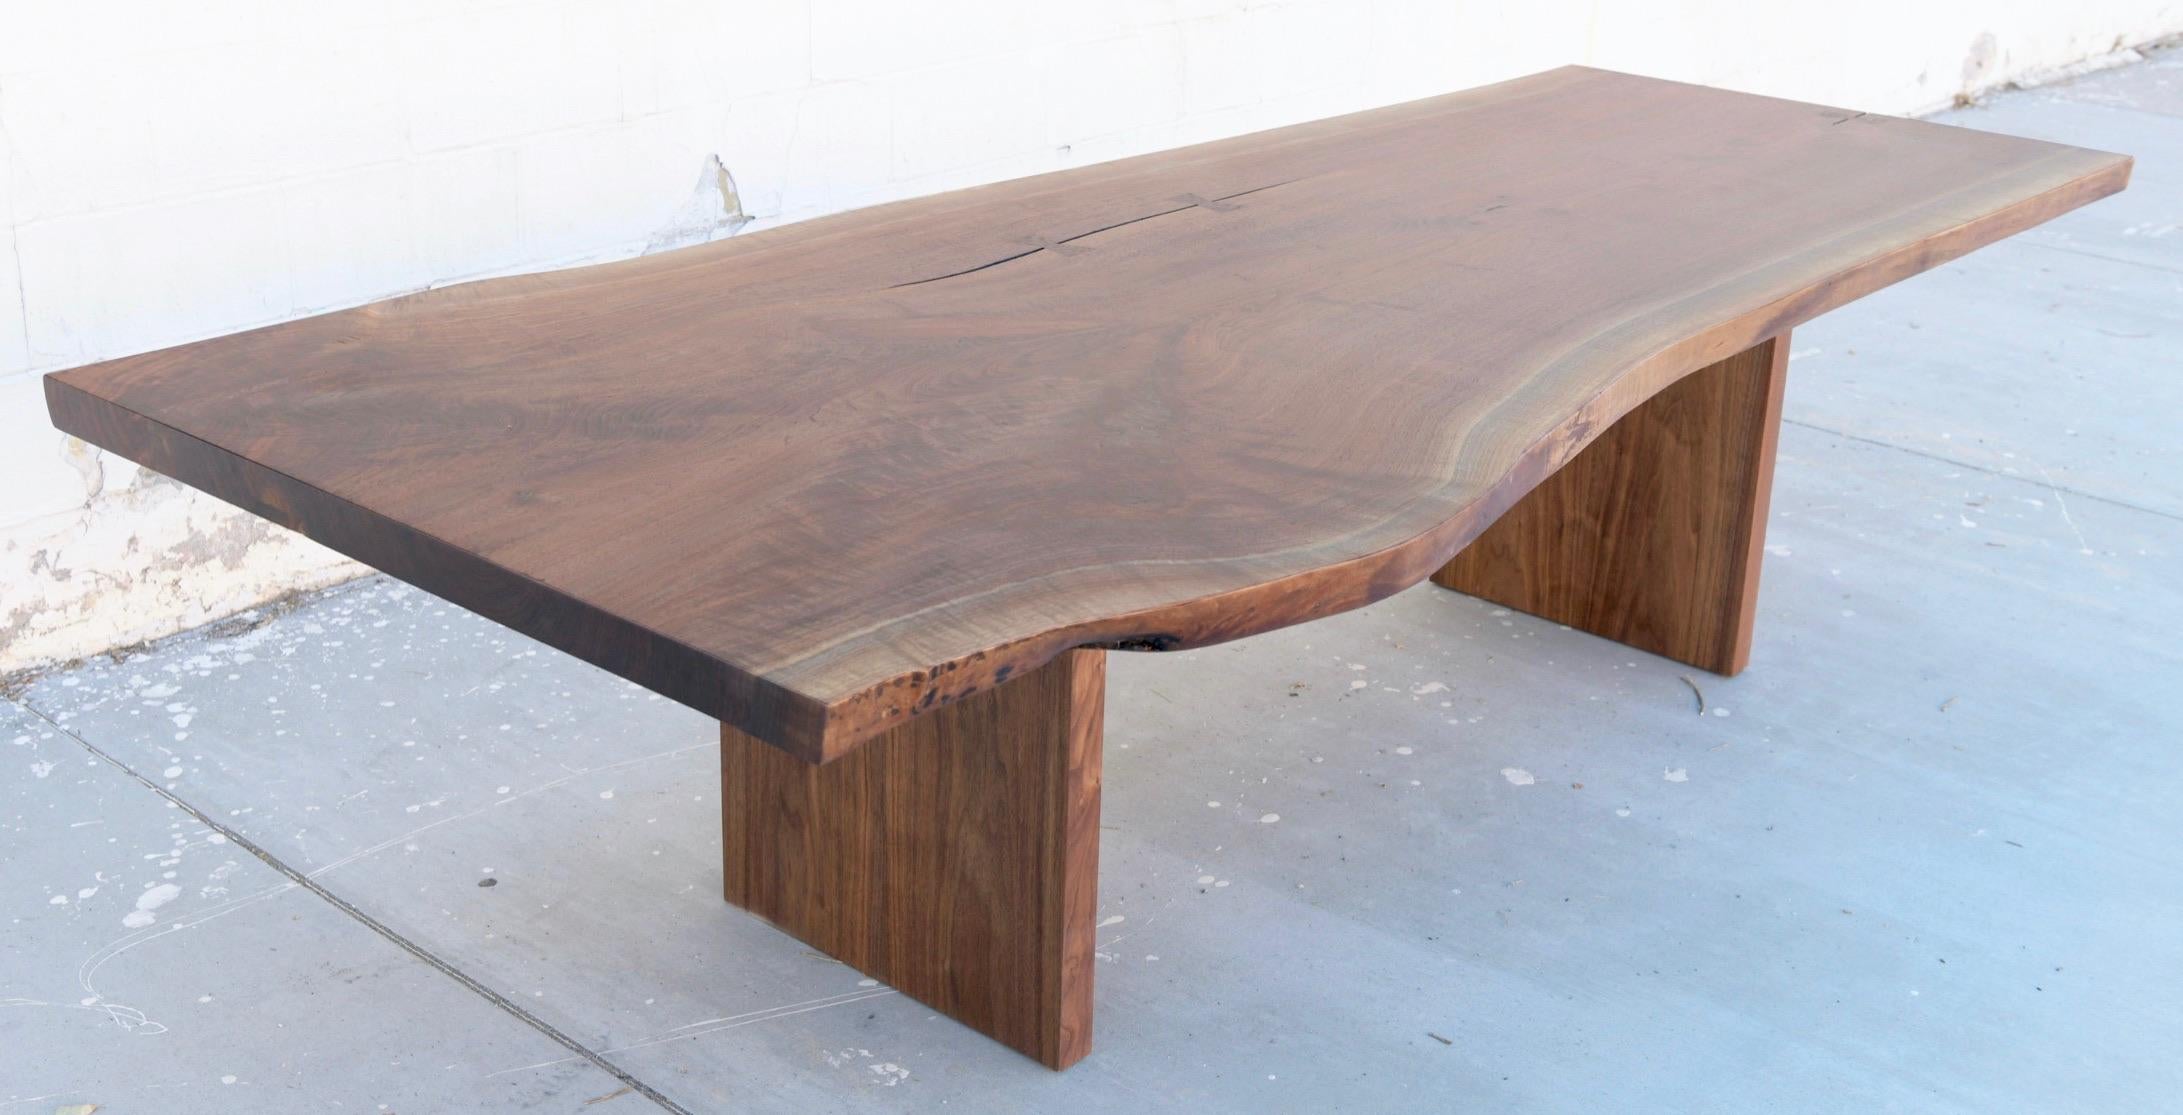 This custom walnut slab dining table is seen here in 108